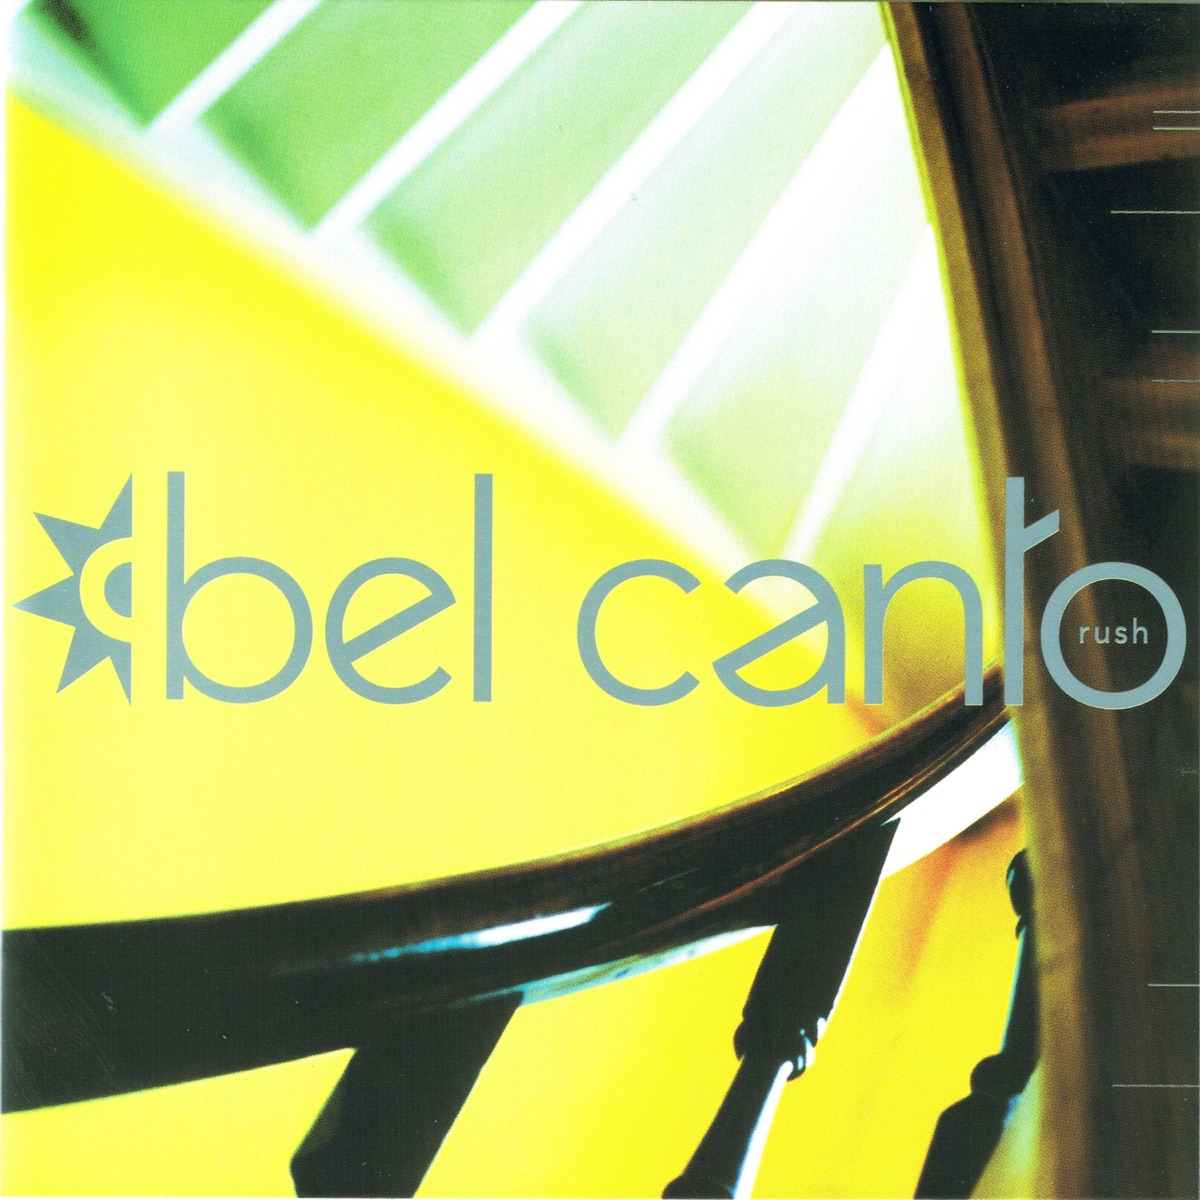 Rush by Bel Canto on Apple Music